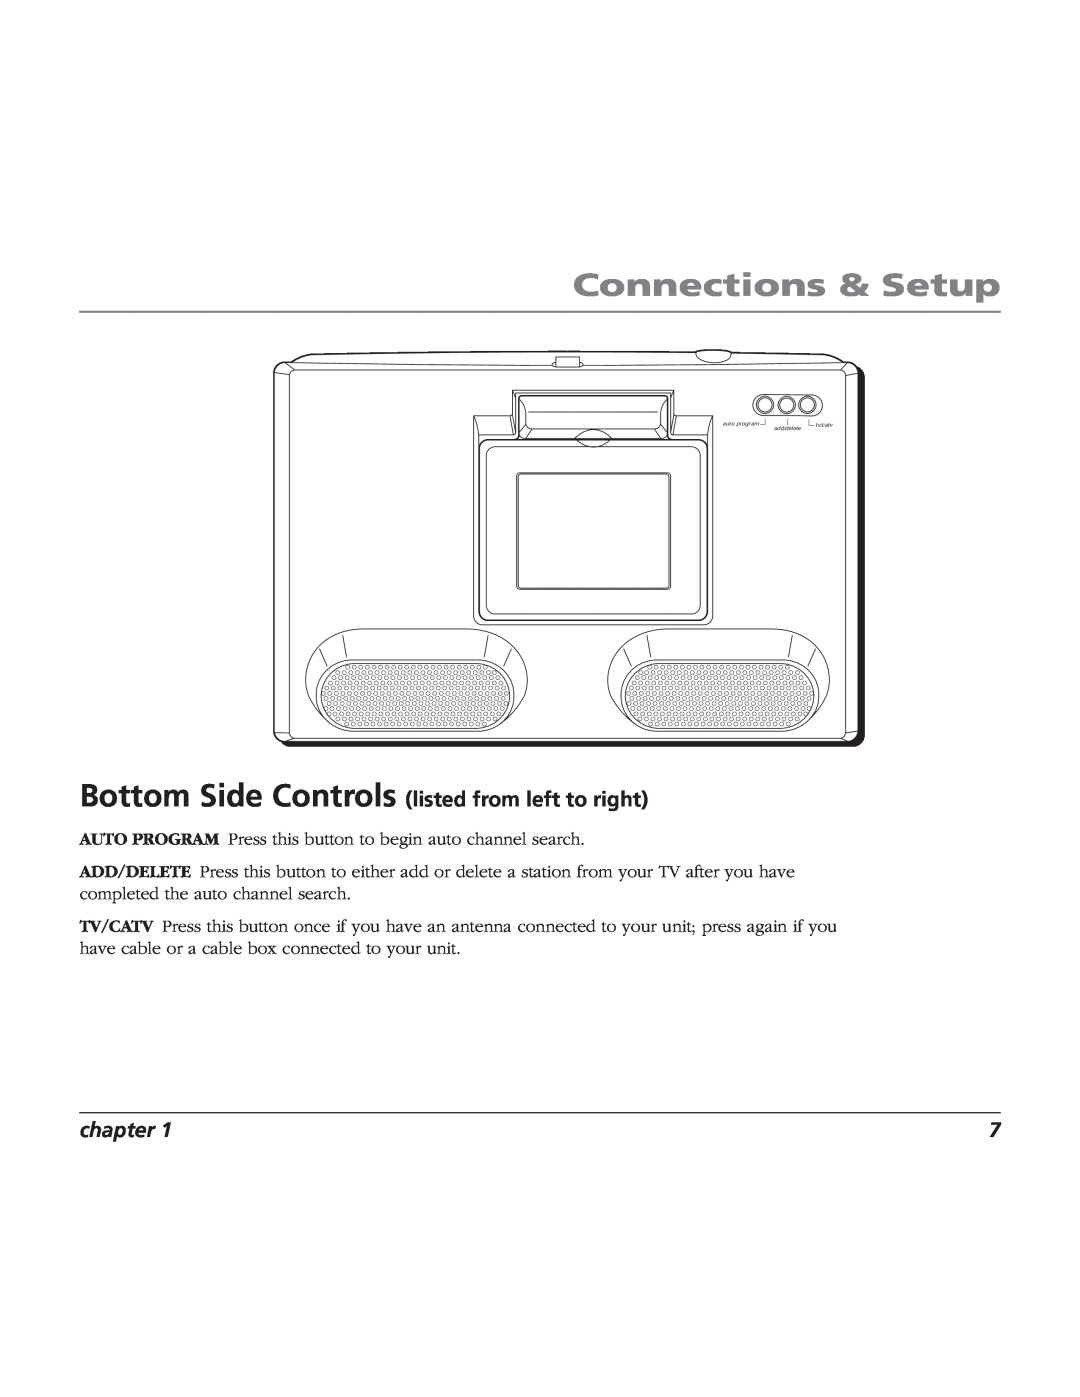 RCA BLC524 user manual Bottom Side Controls listed from left to right, Connections & Setup, chapter 